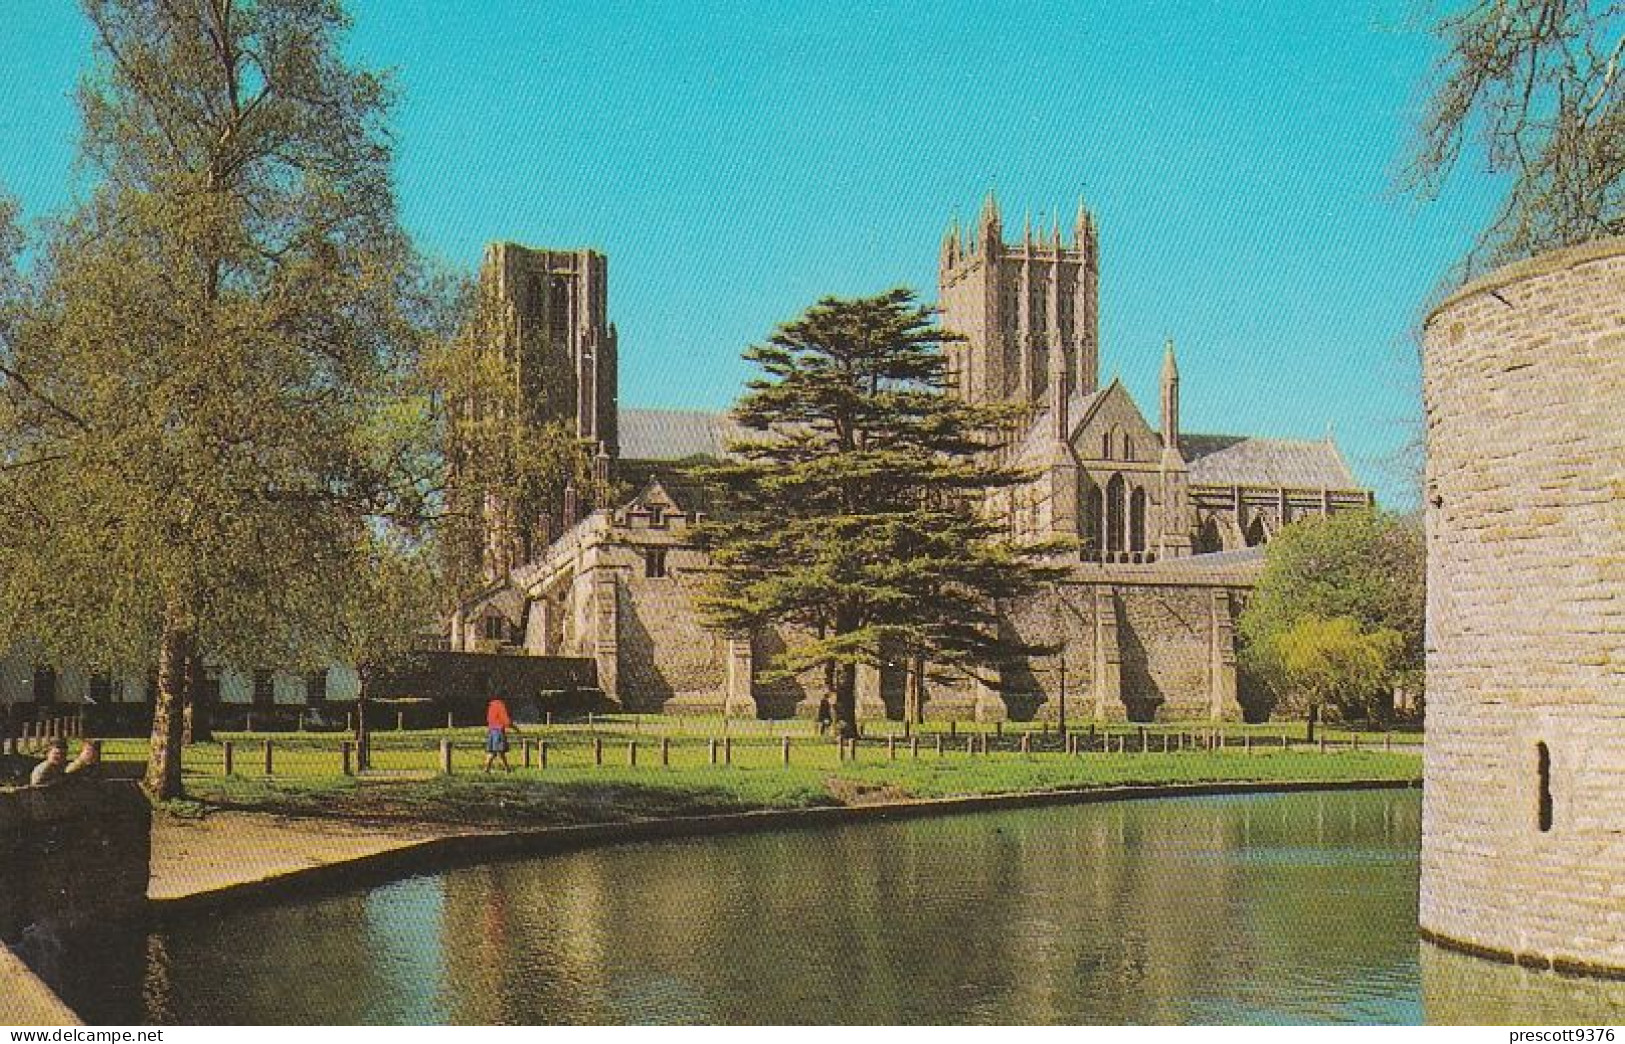 Cathedral & Moat, Wells  - Used Postcard, UK, Stamped 1972 - Wells